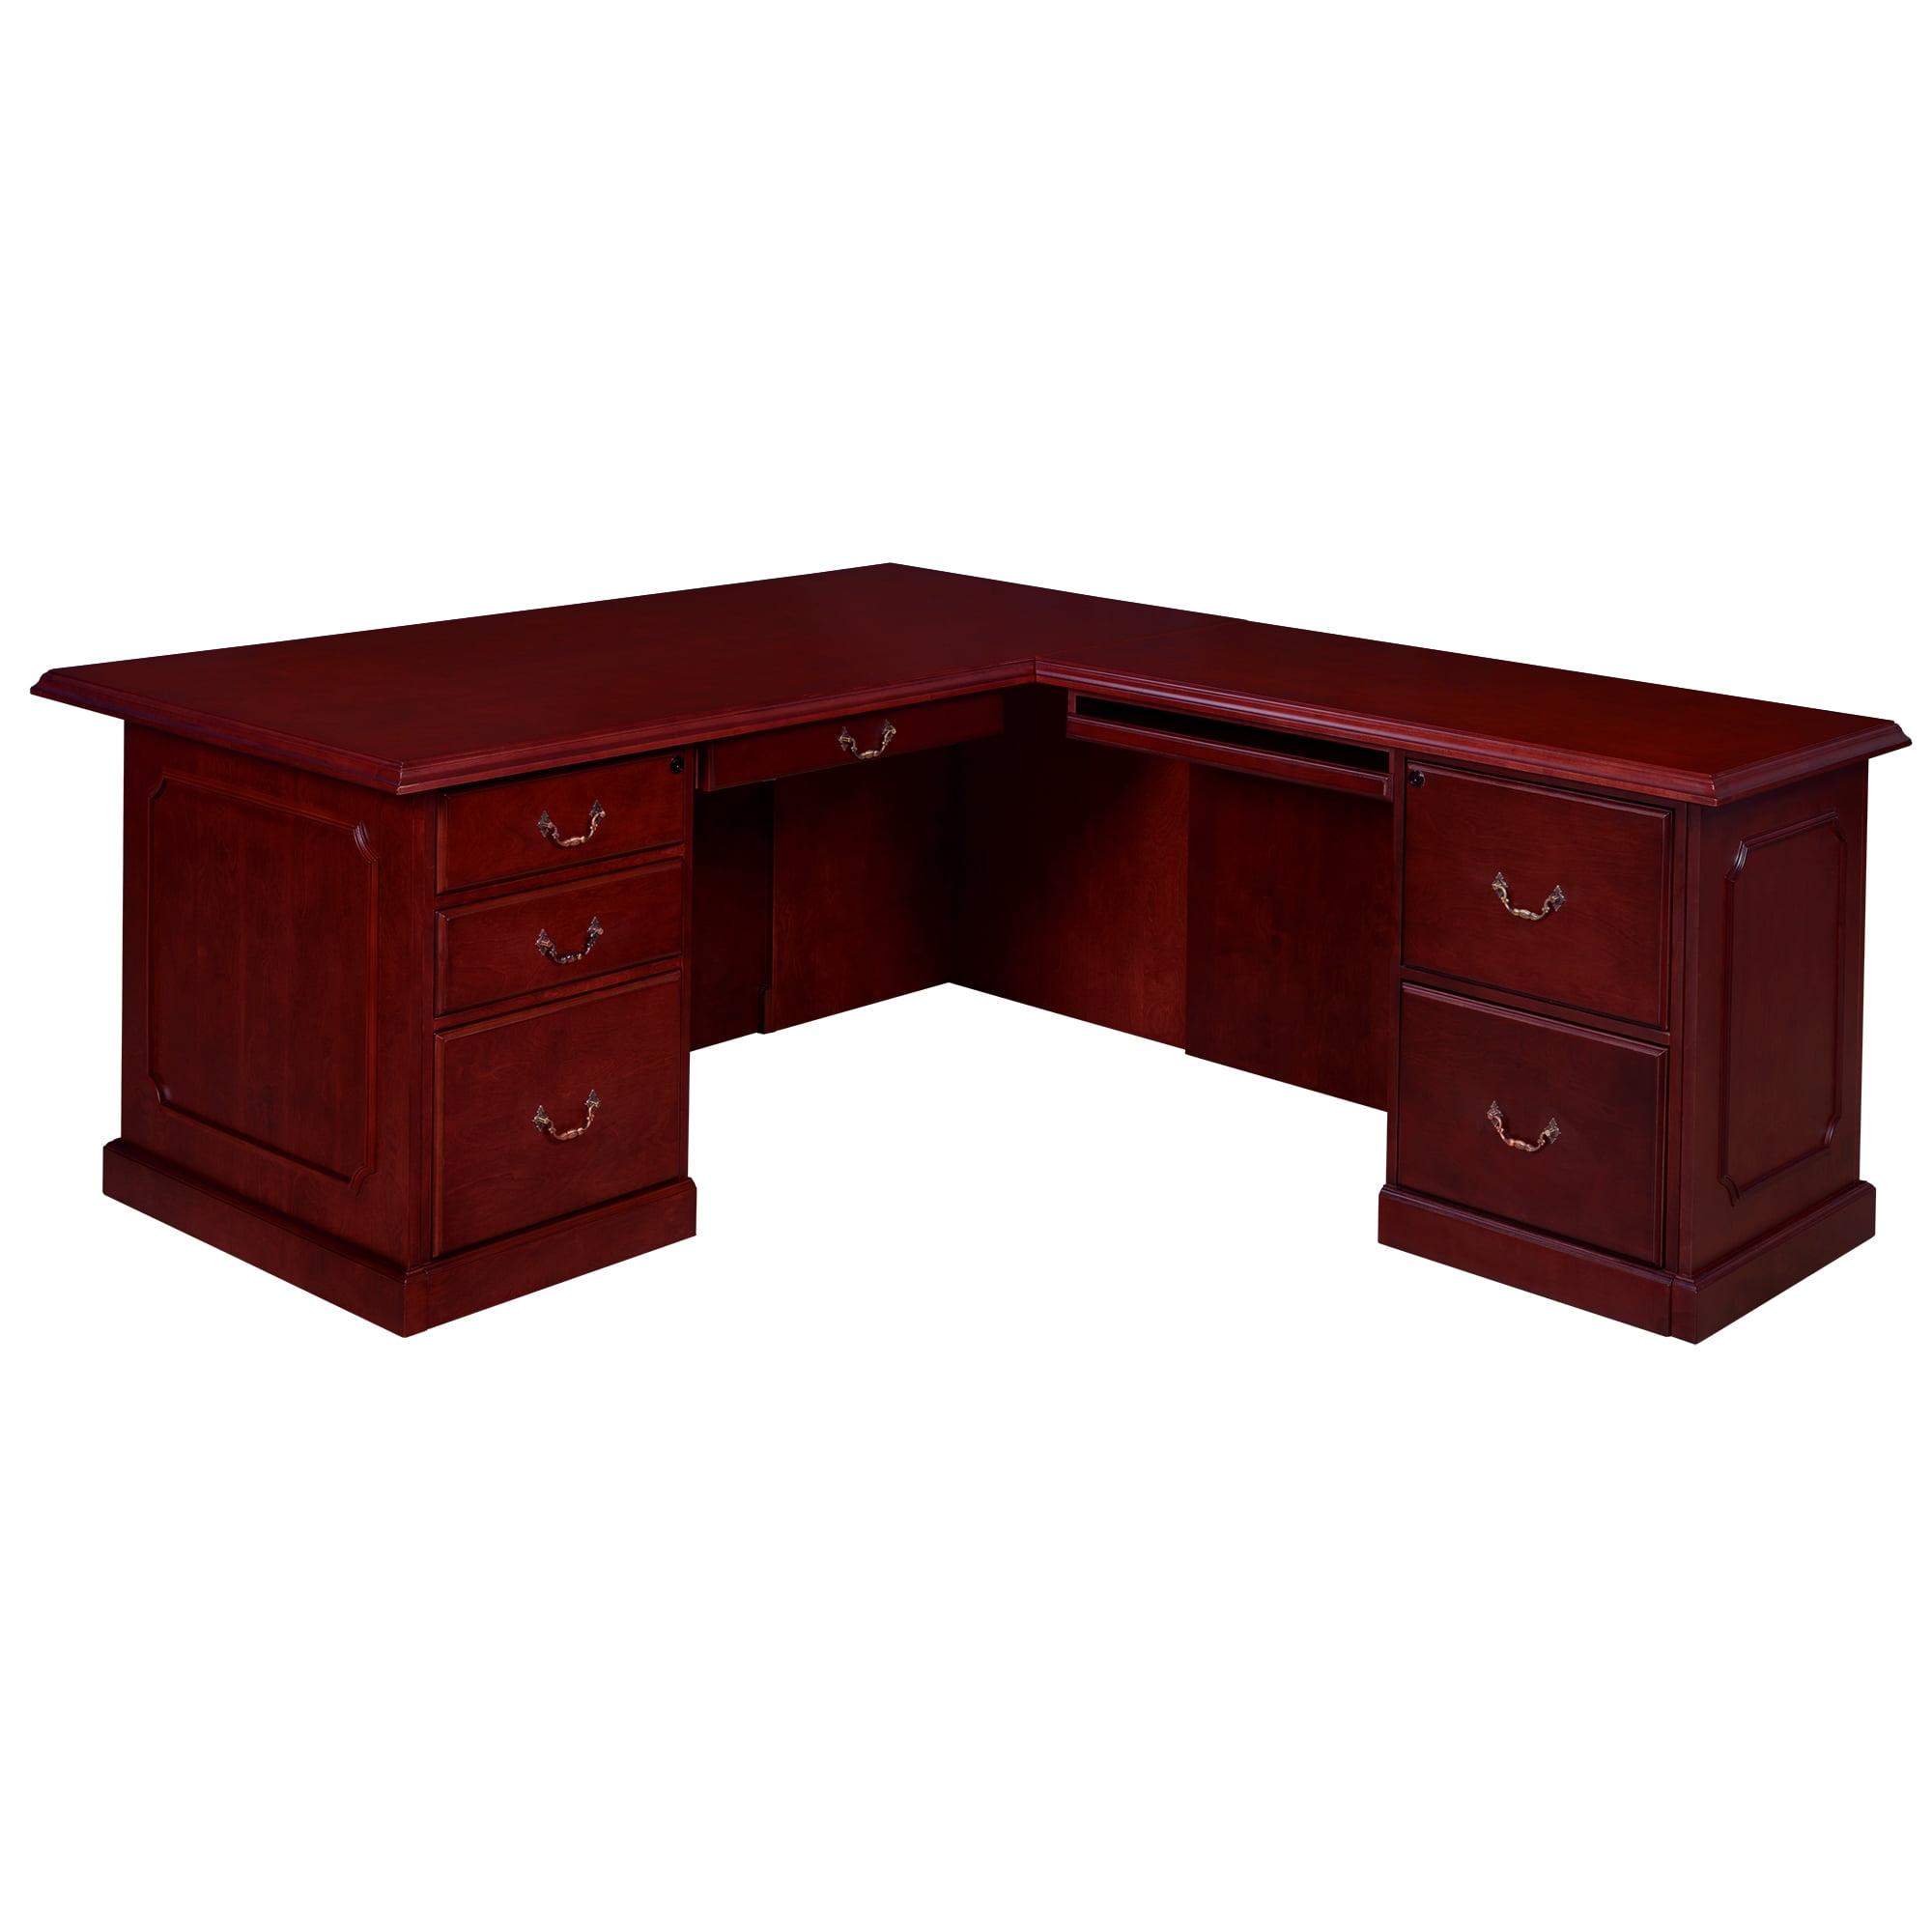 Executive Mahogany Brown Wood L-Shaped Desk with Brass Handles